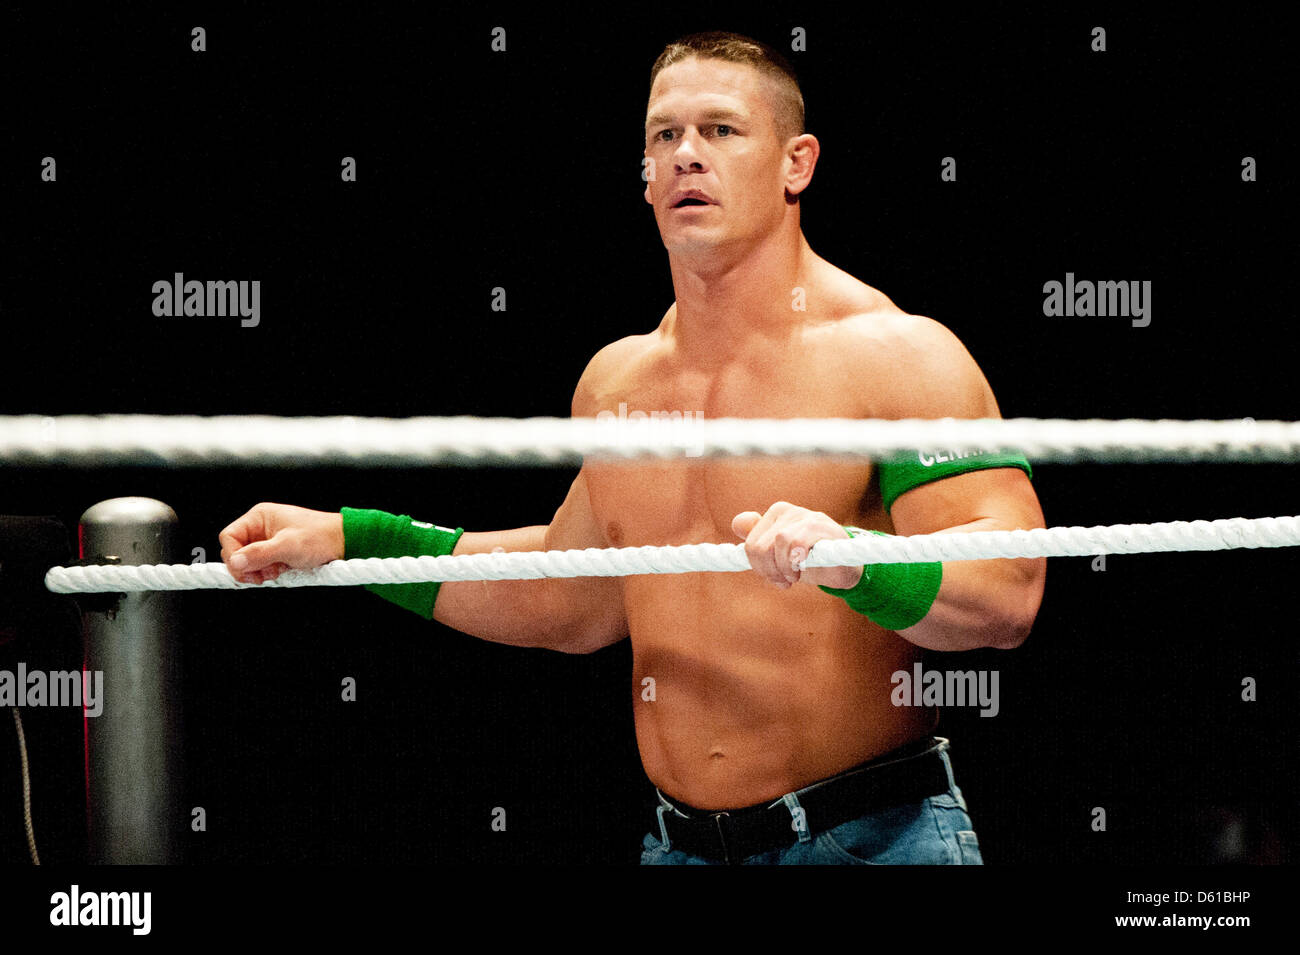 US-wrestler John Cena holds on to the ropes of the wrestling ring during a fight in the RAW WrestleMania Revenge Tour at the o2 World canue in Berlin, Germany, 14 April 2012. The WWE (World Wrestling Entertainment) celebrates its 20th German anniversary this April. The first show in Germany was staged in Kiel, Germany, in April 1992. Photo: Sebastian Kahnert Stock Photo